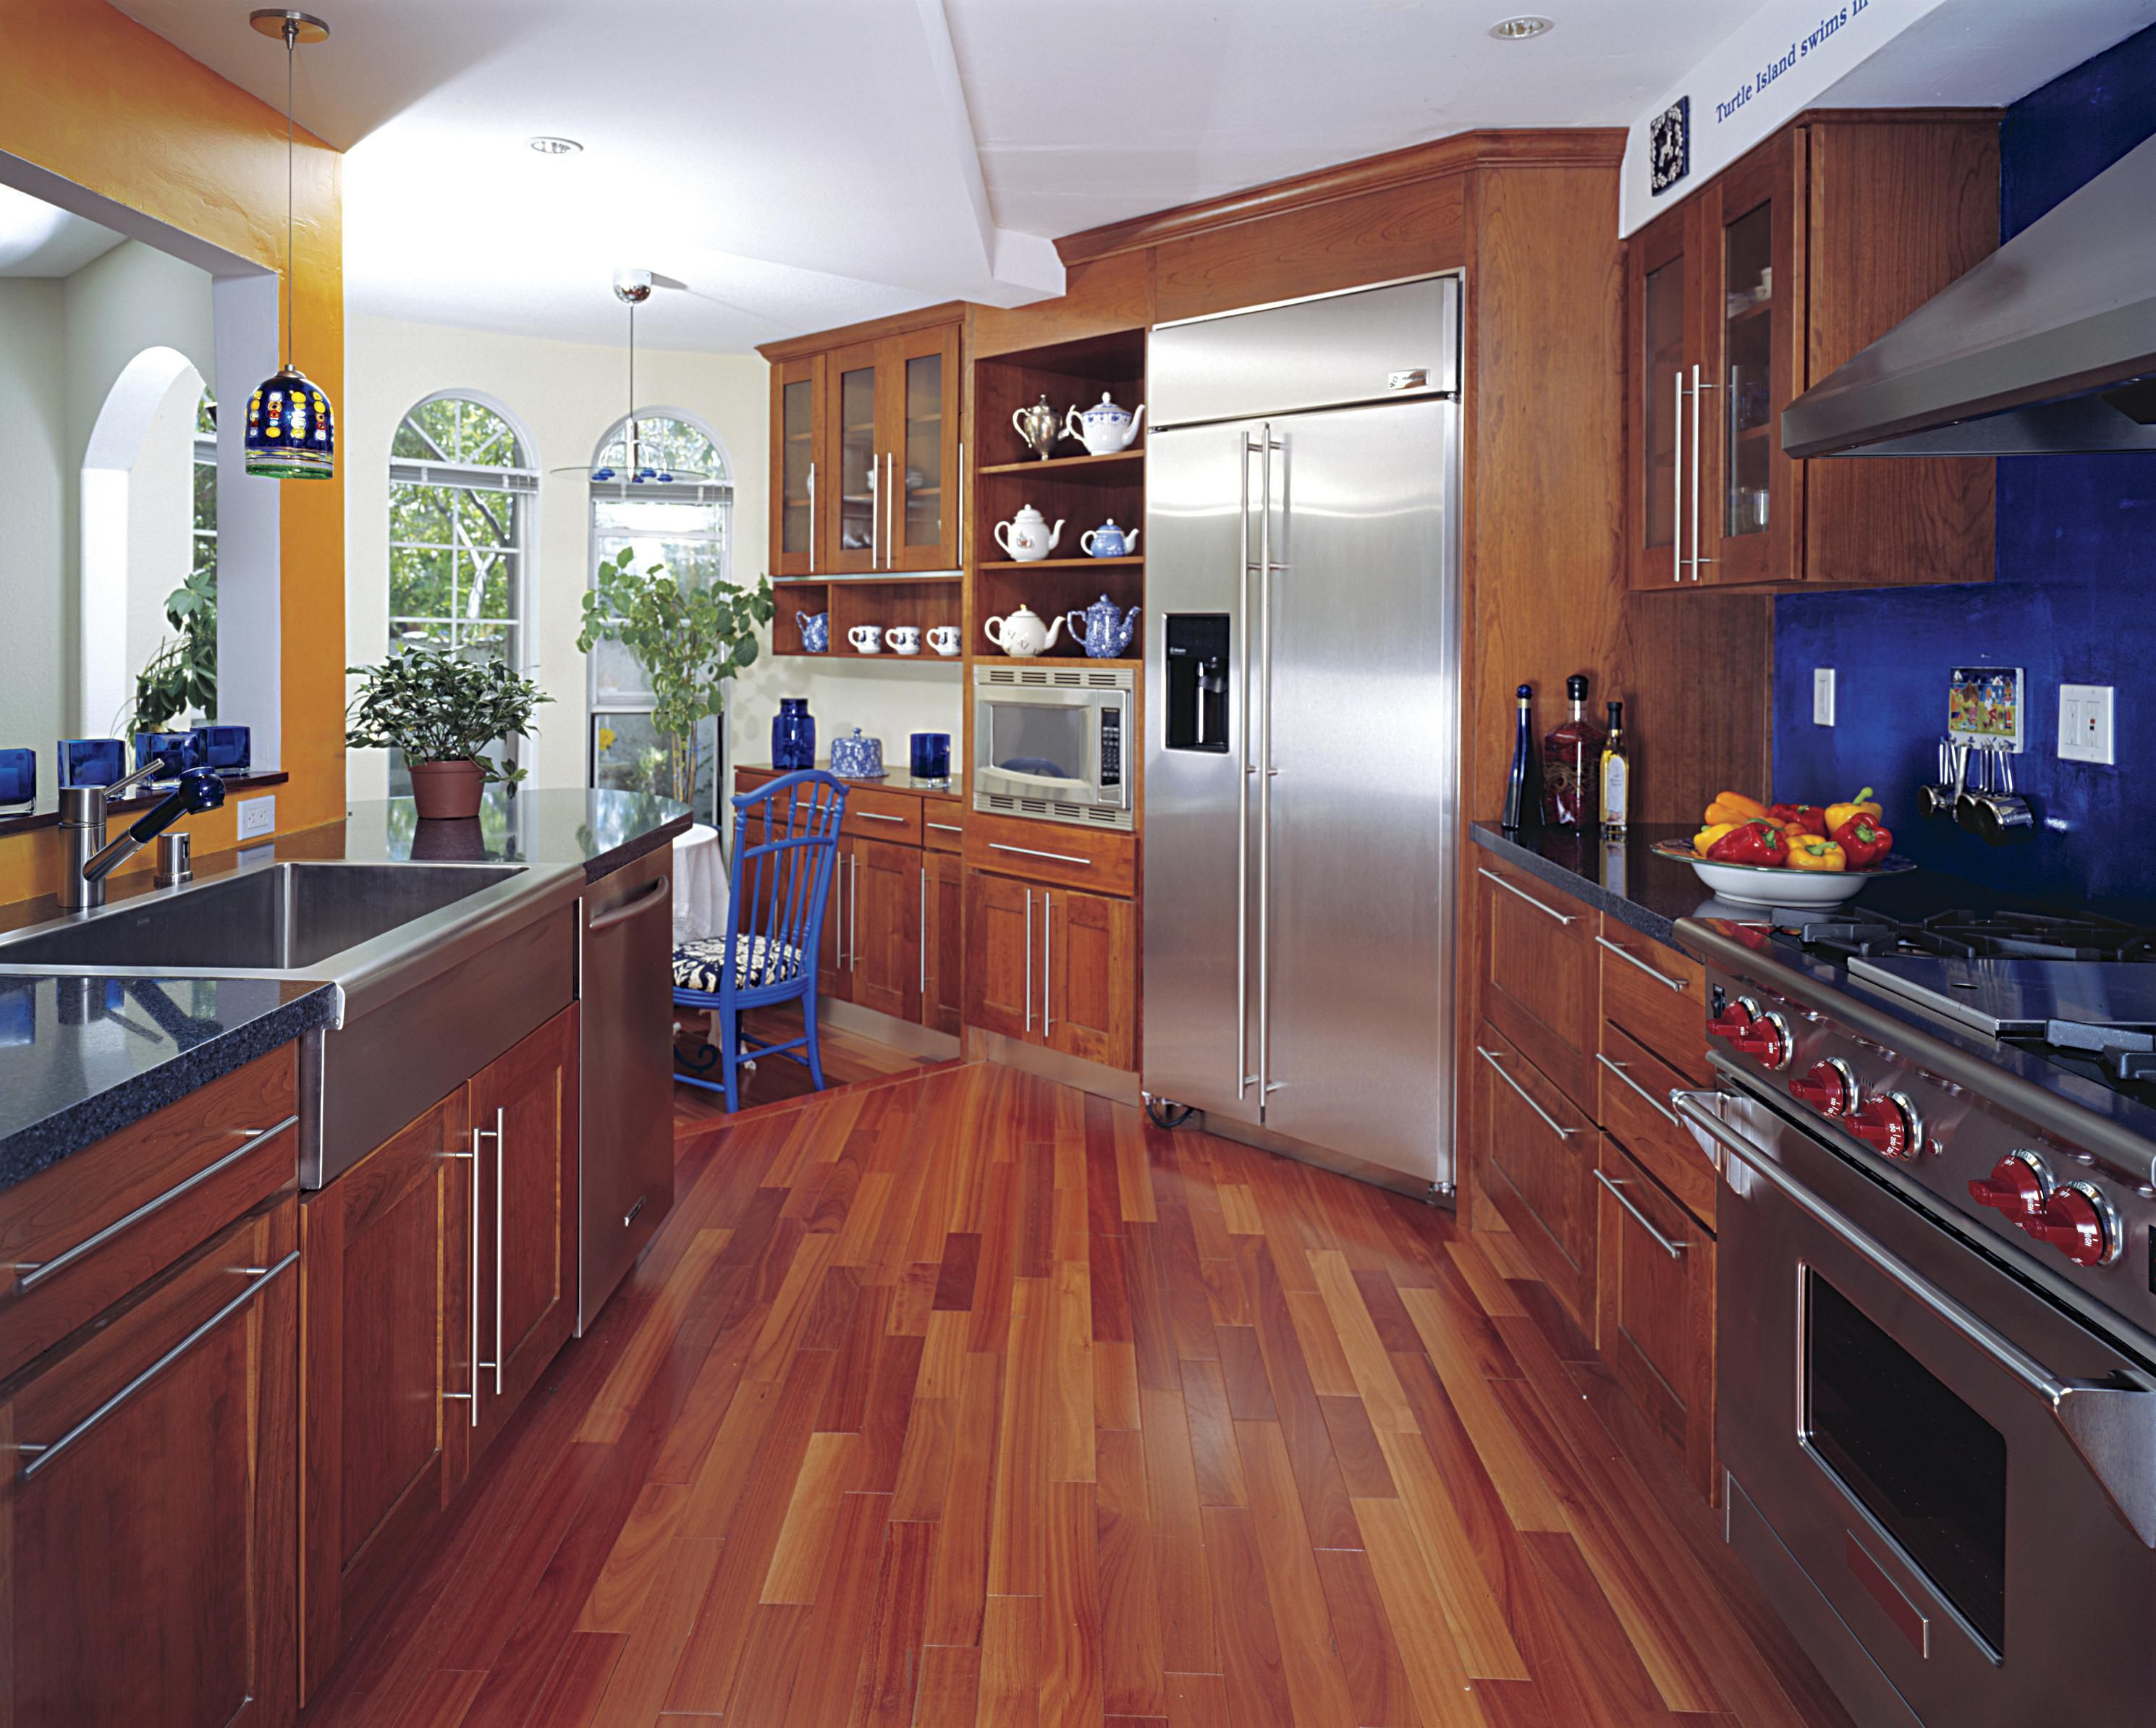 23 Famous 1 1 2 Hardwood Flooring 2022 free download 1 1 2 hardwood flooring of hardwood floor in a kitchen is this allowed pertaining to 186828472 56a49f3a5f9b58b7d0d7e142